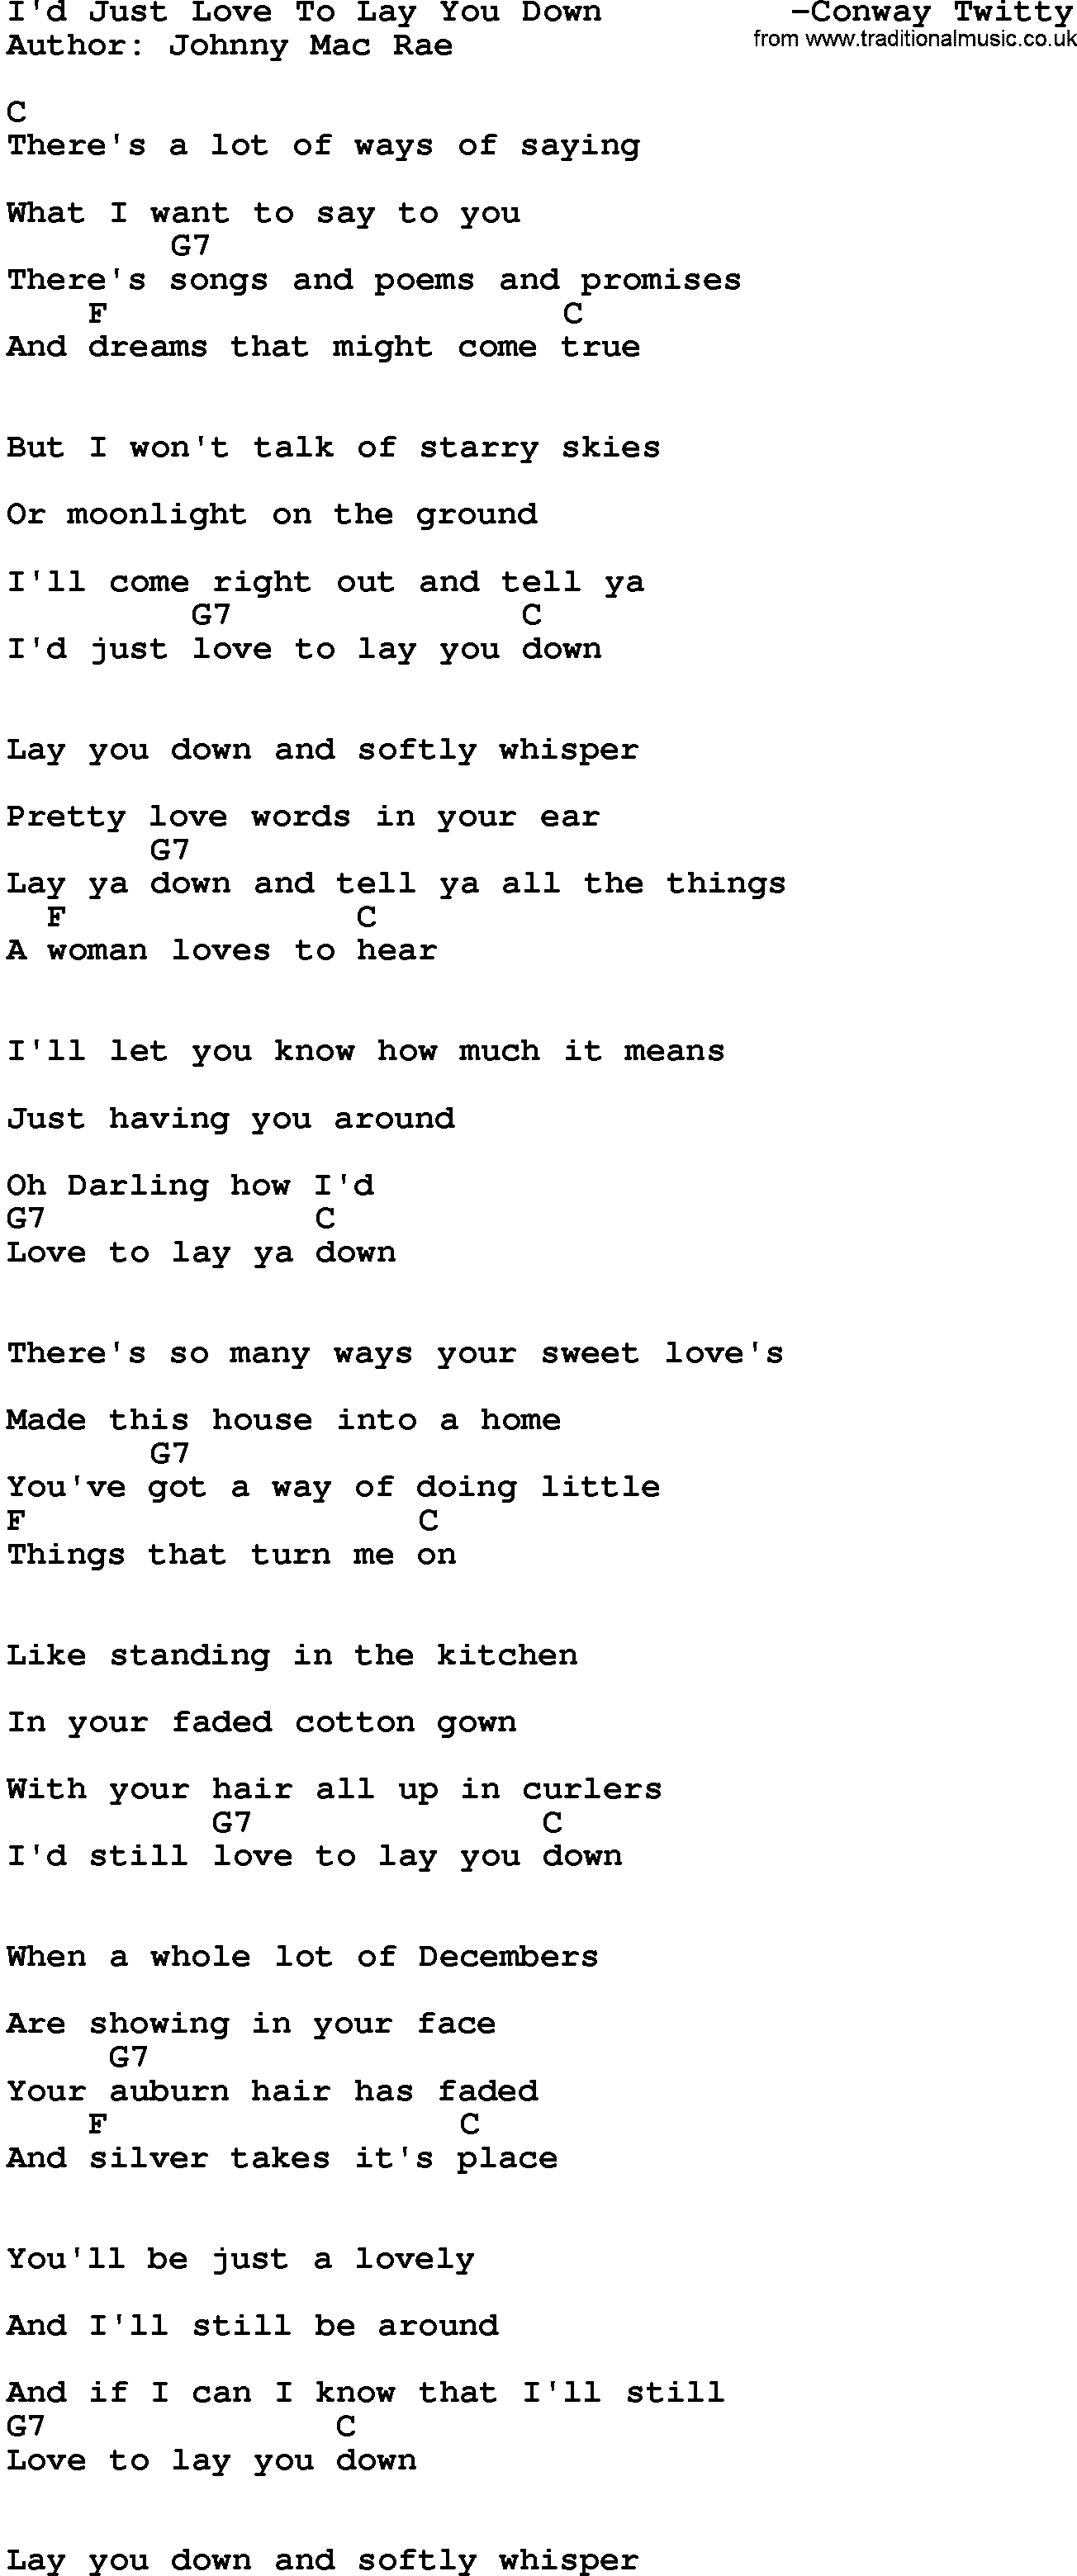 Country music song: I'd Just Love To Lay You Down   -Conway Twitty lyrics and chords